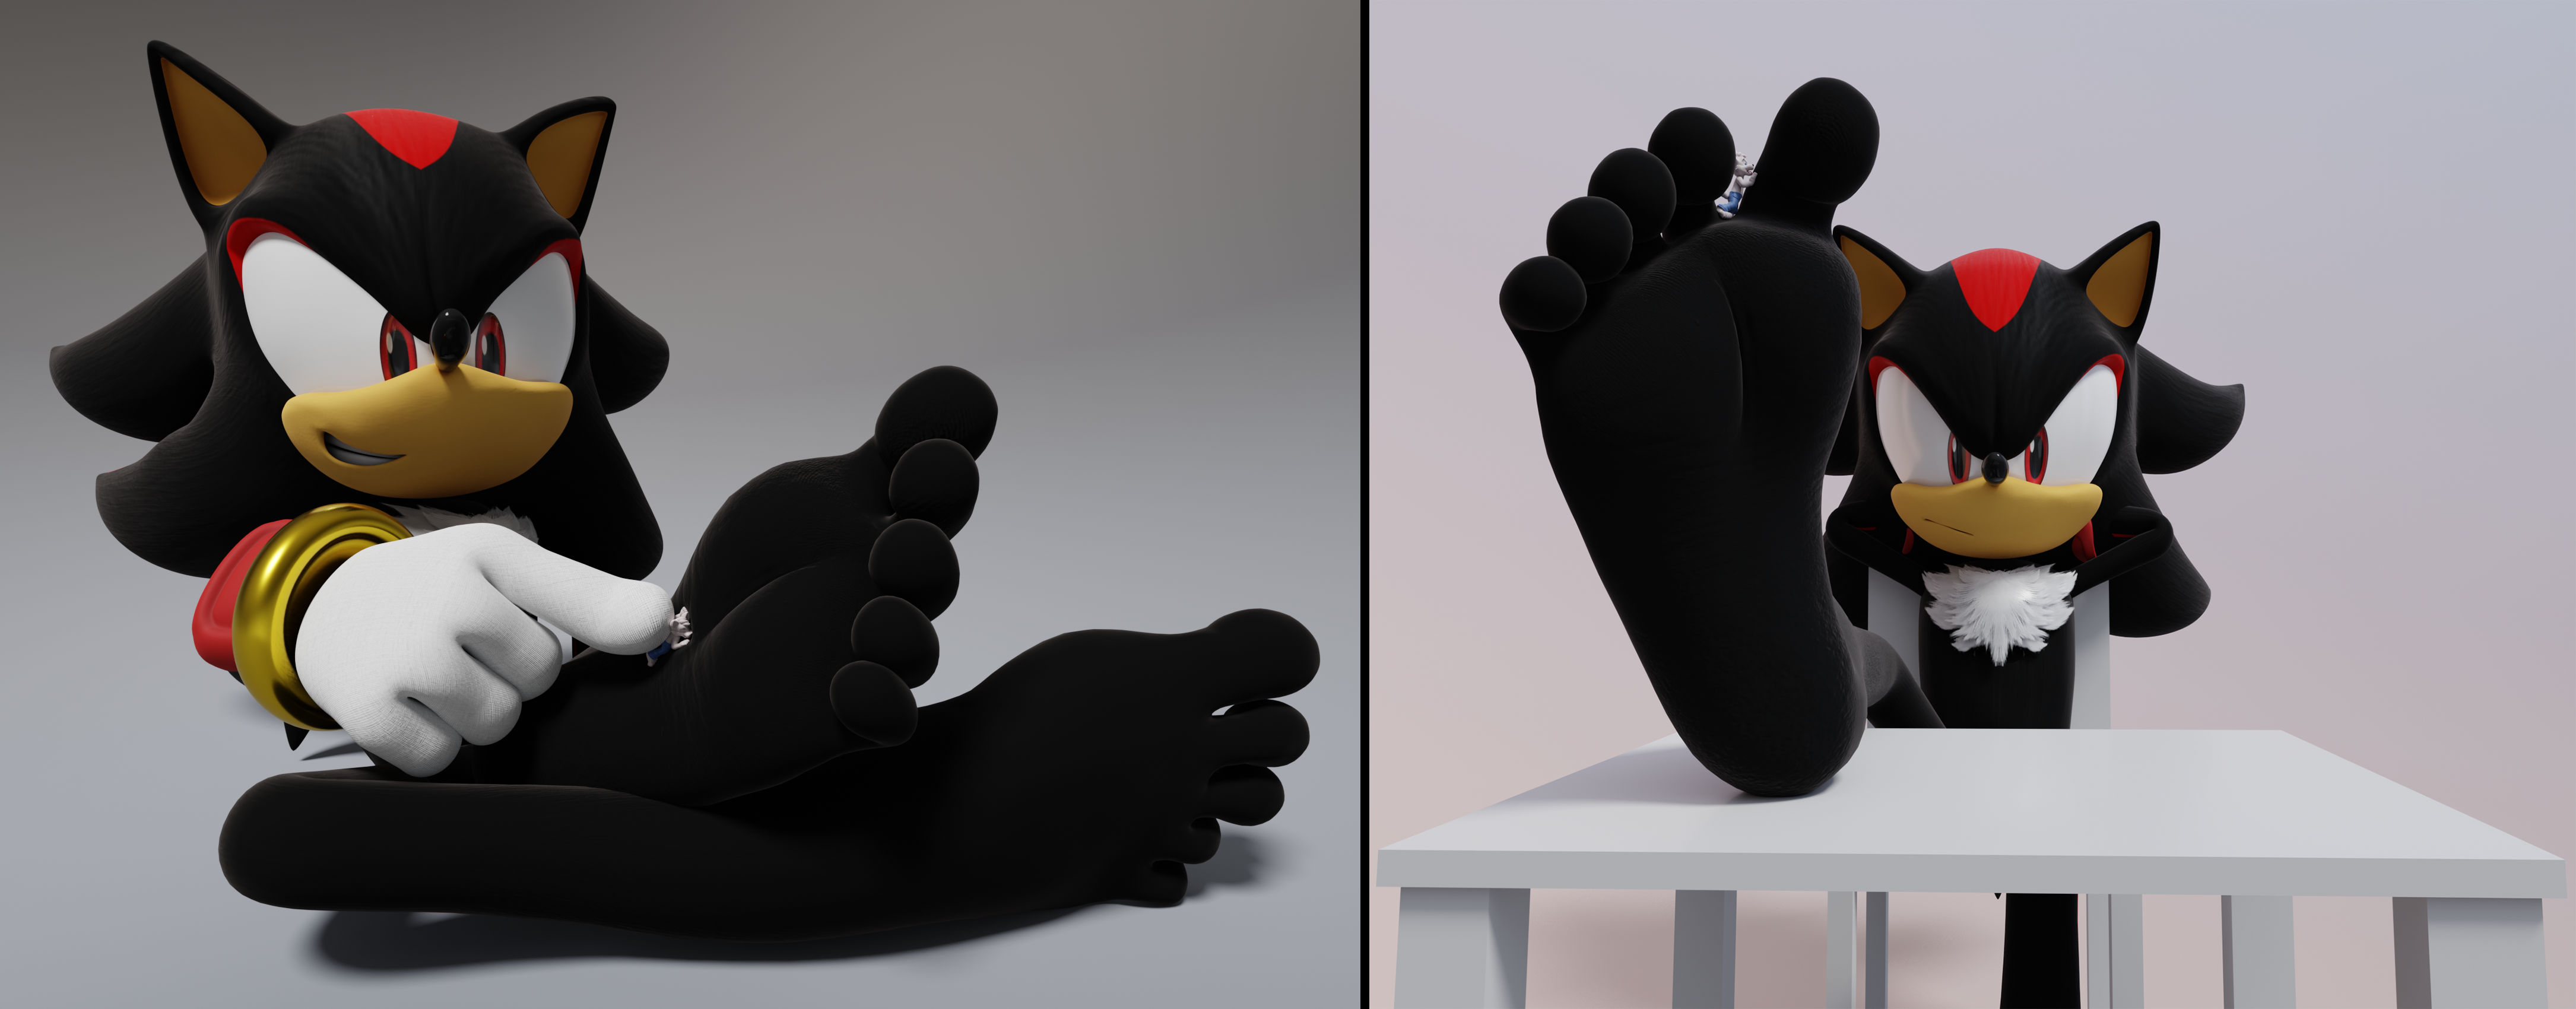 3D] Inside Shadow's Shoes by FeetyMcFoot -- Fur Affinity [dot] net